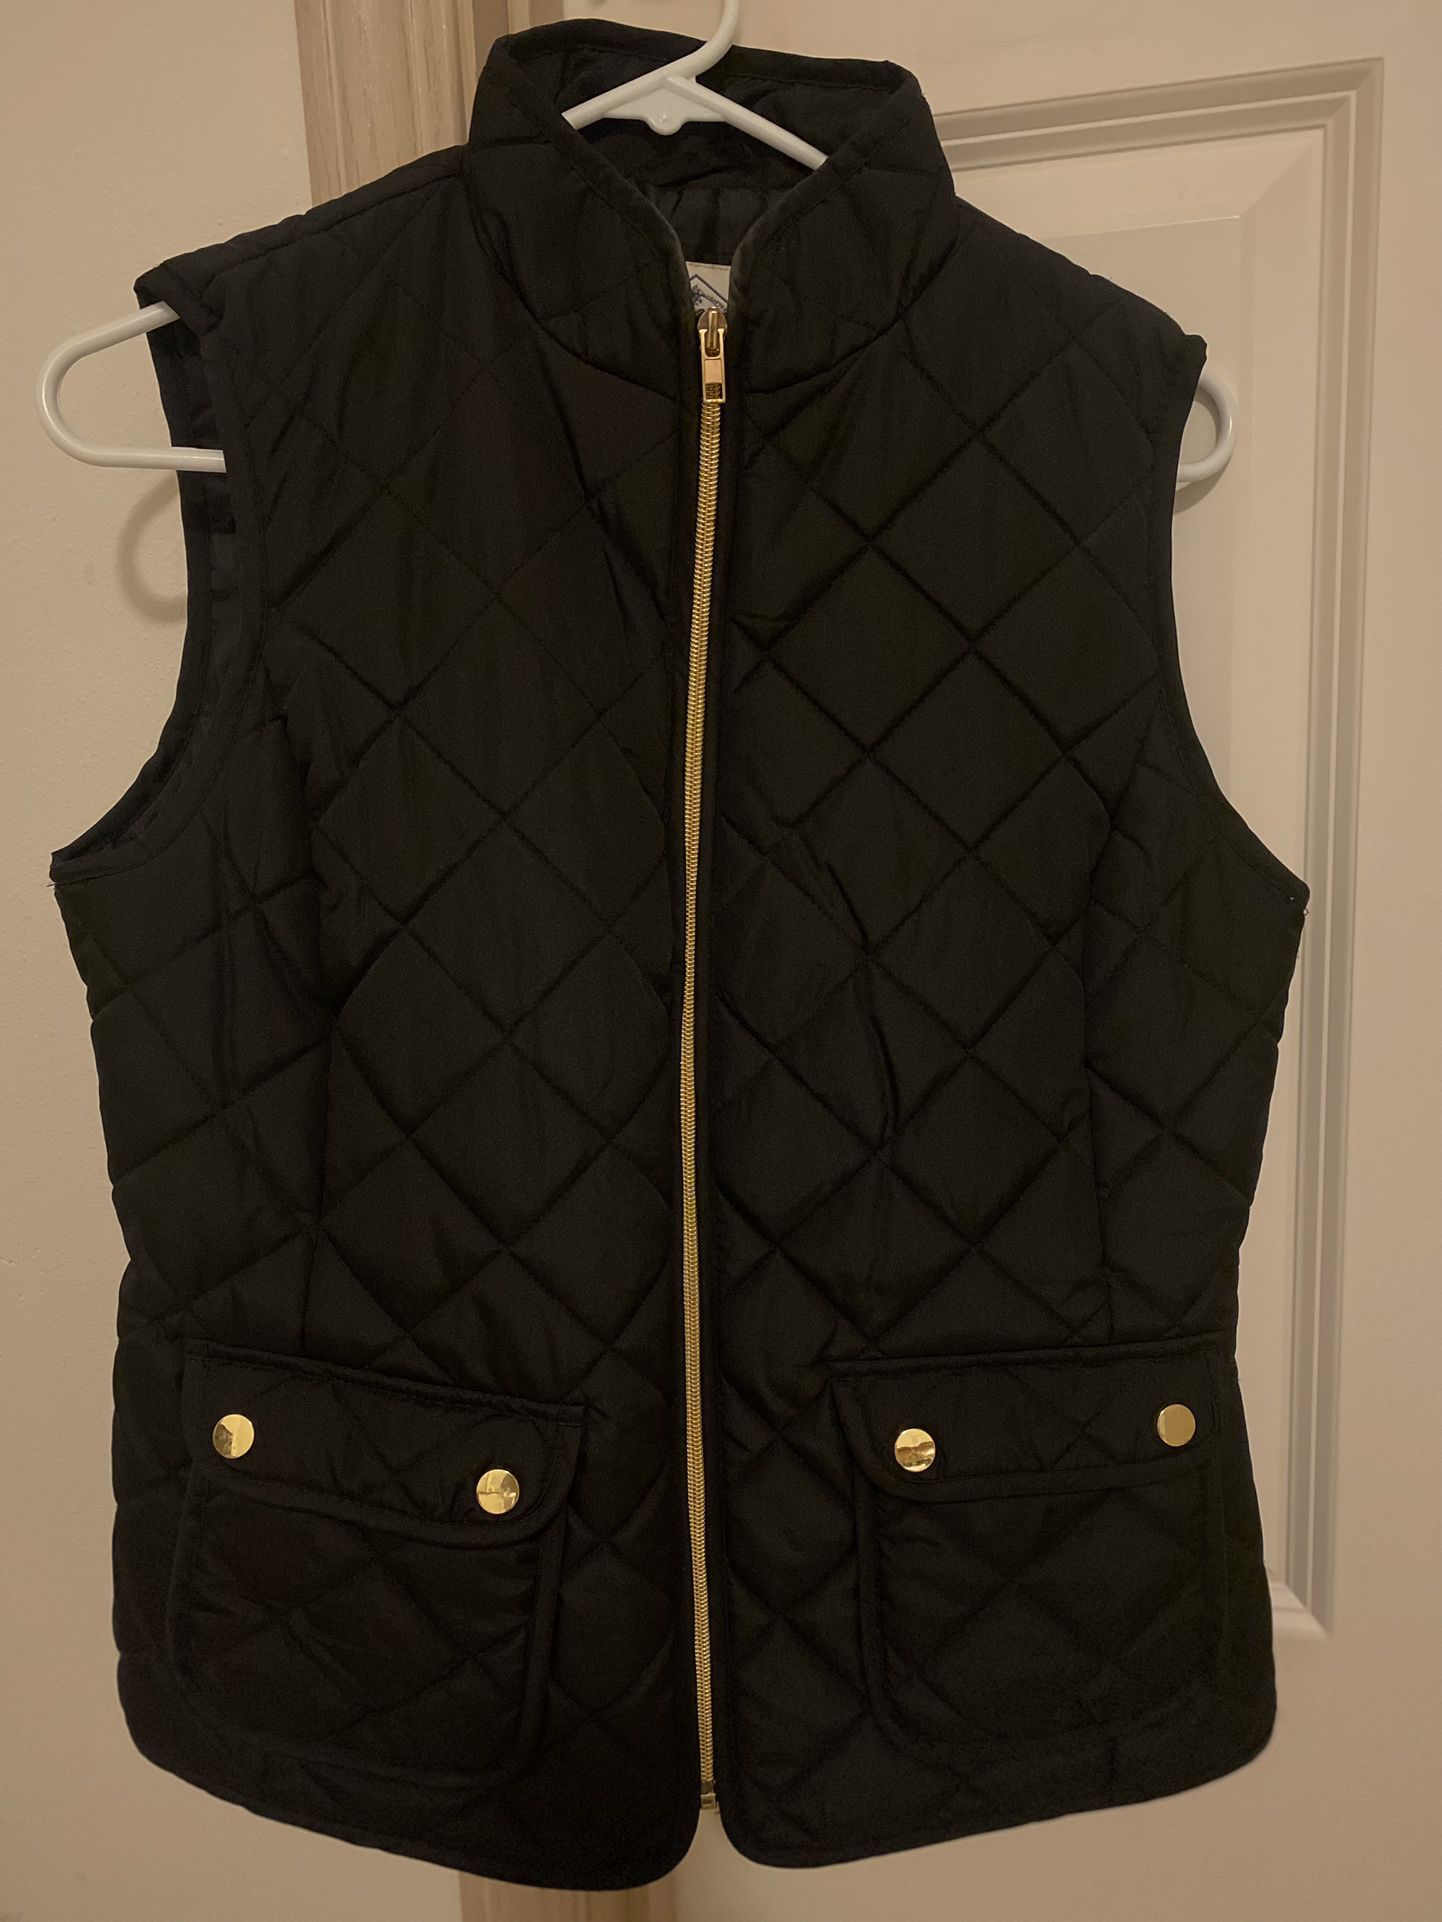 St. Johns Bay Black Puffer Vest with front pockets Women's Small